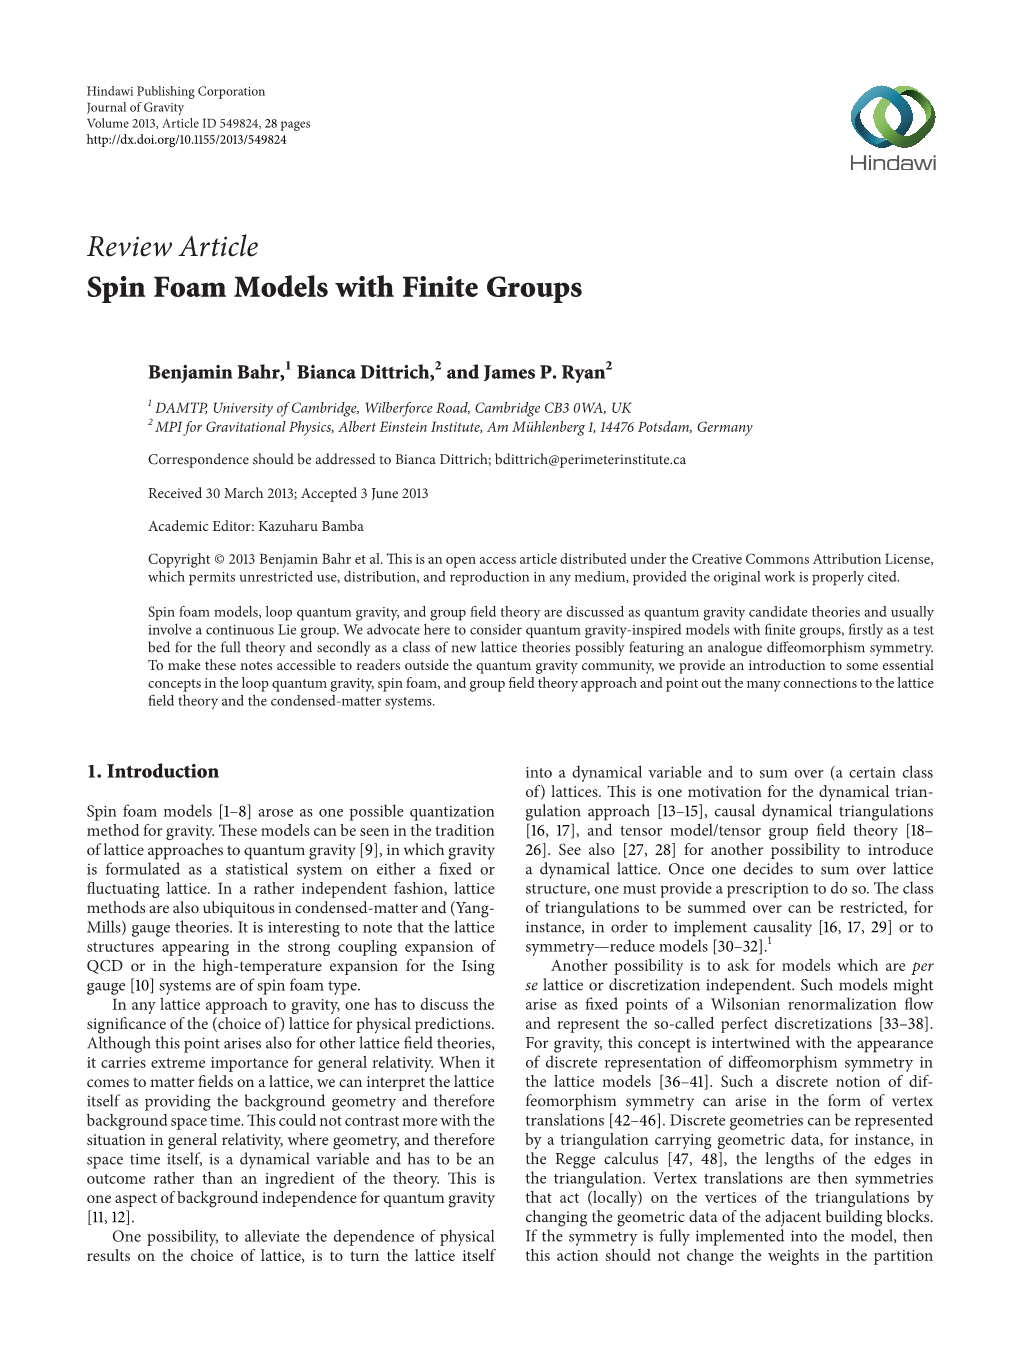 Review Article Spin Foam Models with Finite Groups